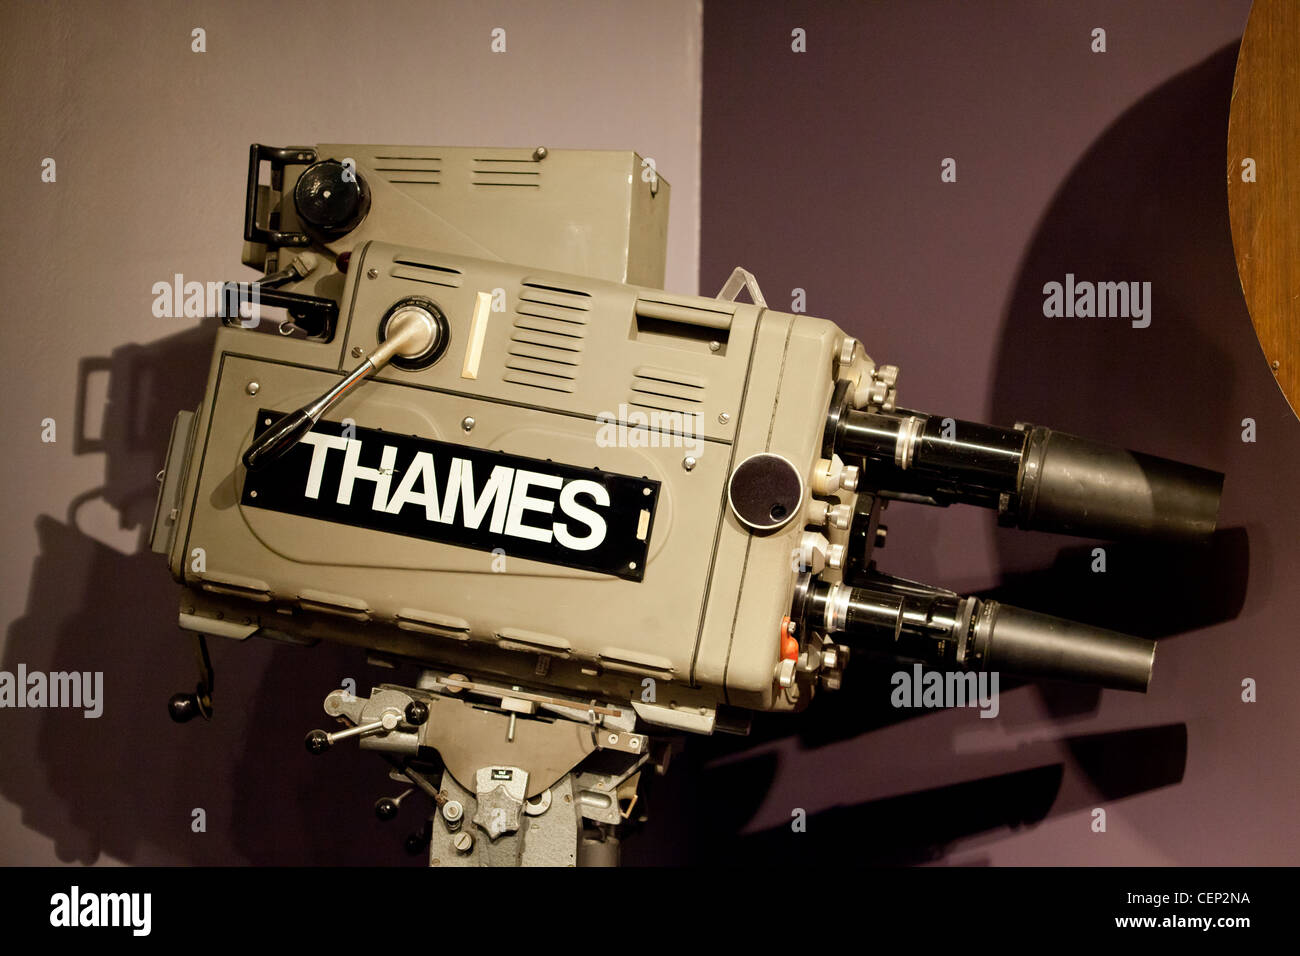 Ancient filming equipment, Thames TV camera Stock Photo - Alamy